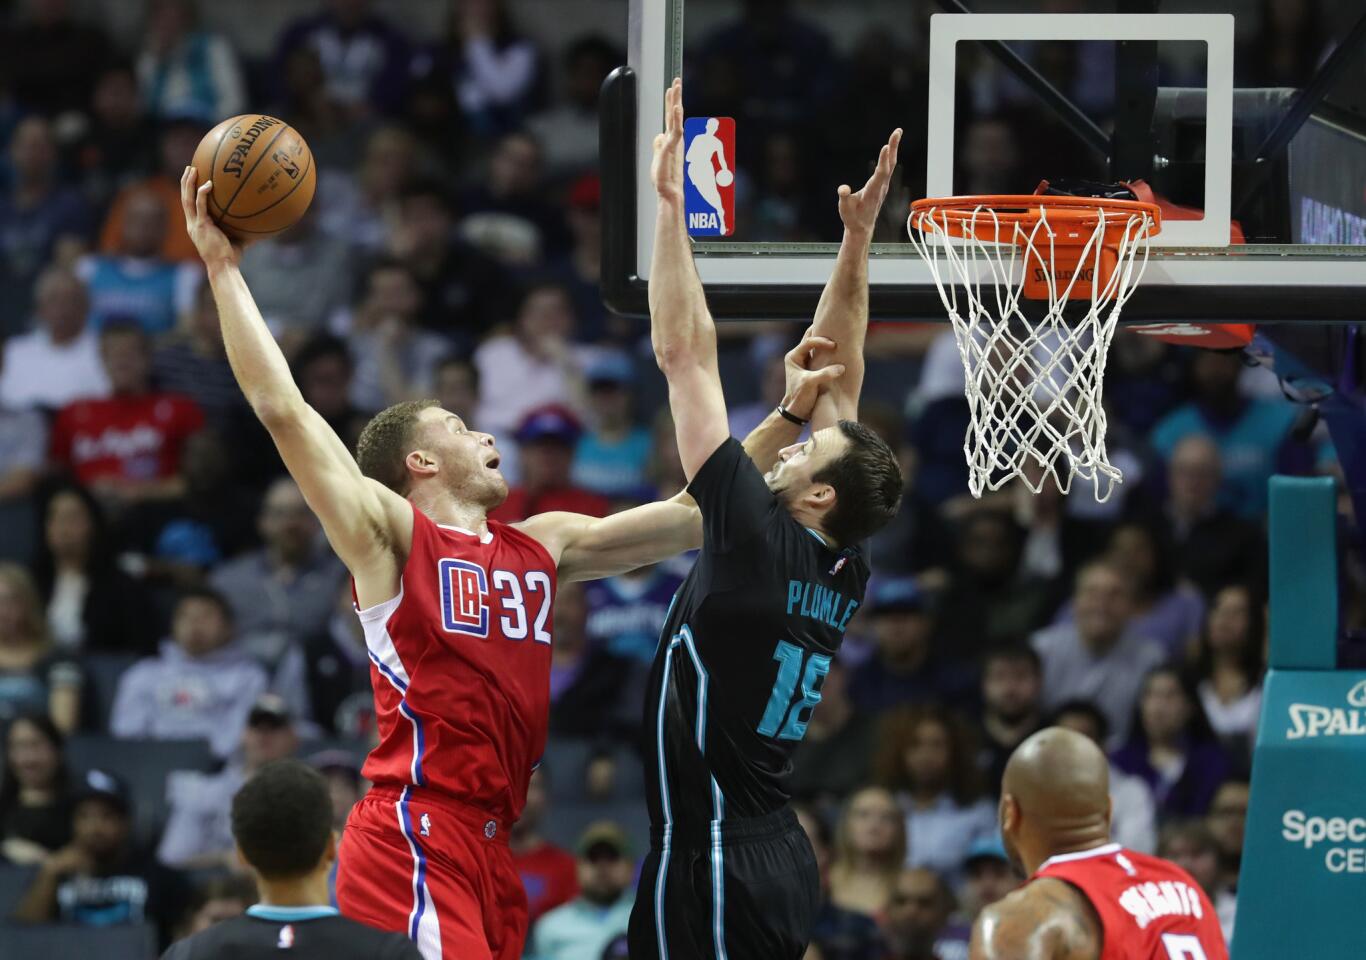 Clippers forward Blake Griffin dunks the ball over Hornets center Miles Plumlee during a game on Feb. 11.